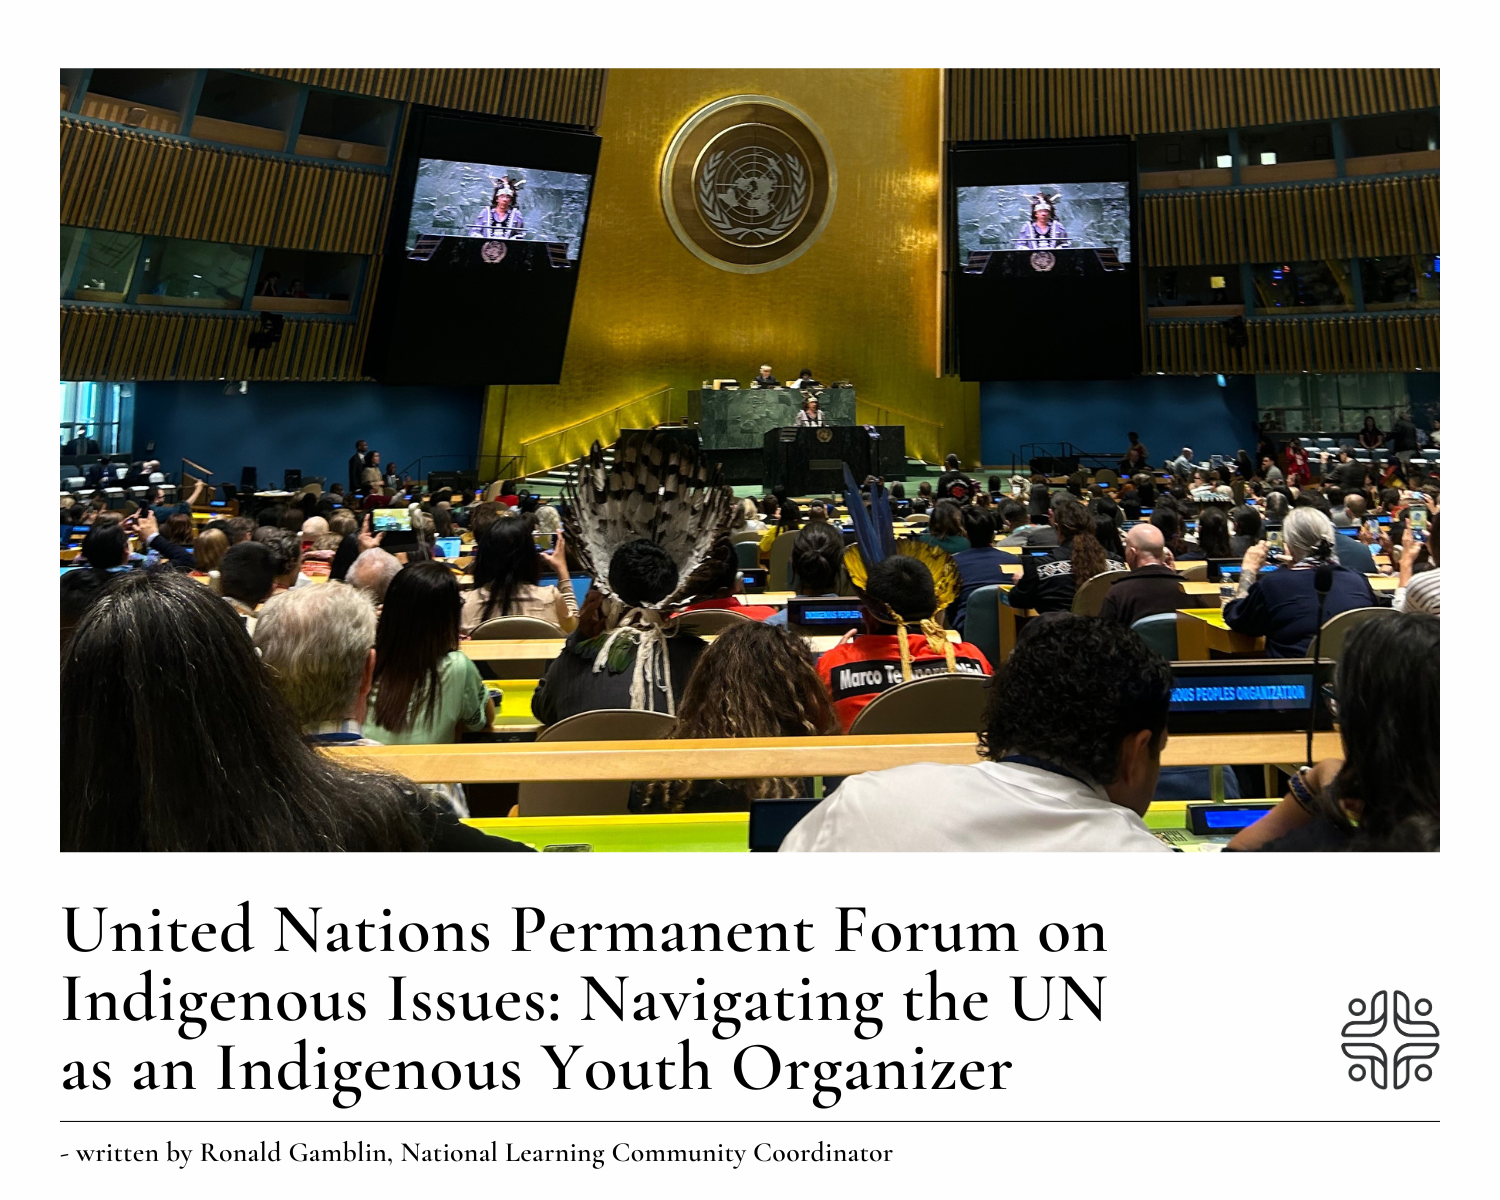 Photo of the United Nations General Assembly Hall with text below: United Nations Permanent Forum on Indigenous Issues: Navigating the UN as an Indigenous Youth Organizer - written by Ronald Gamblin, National Learning Community Coordinator